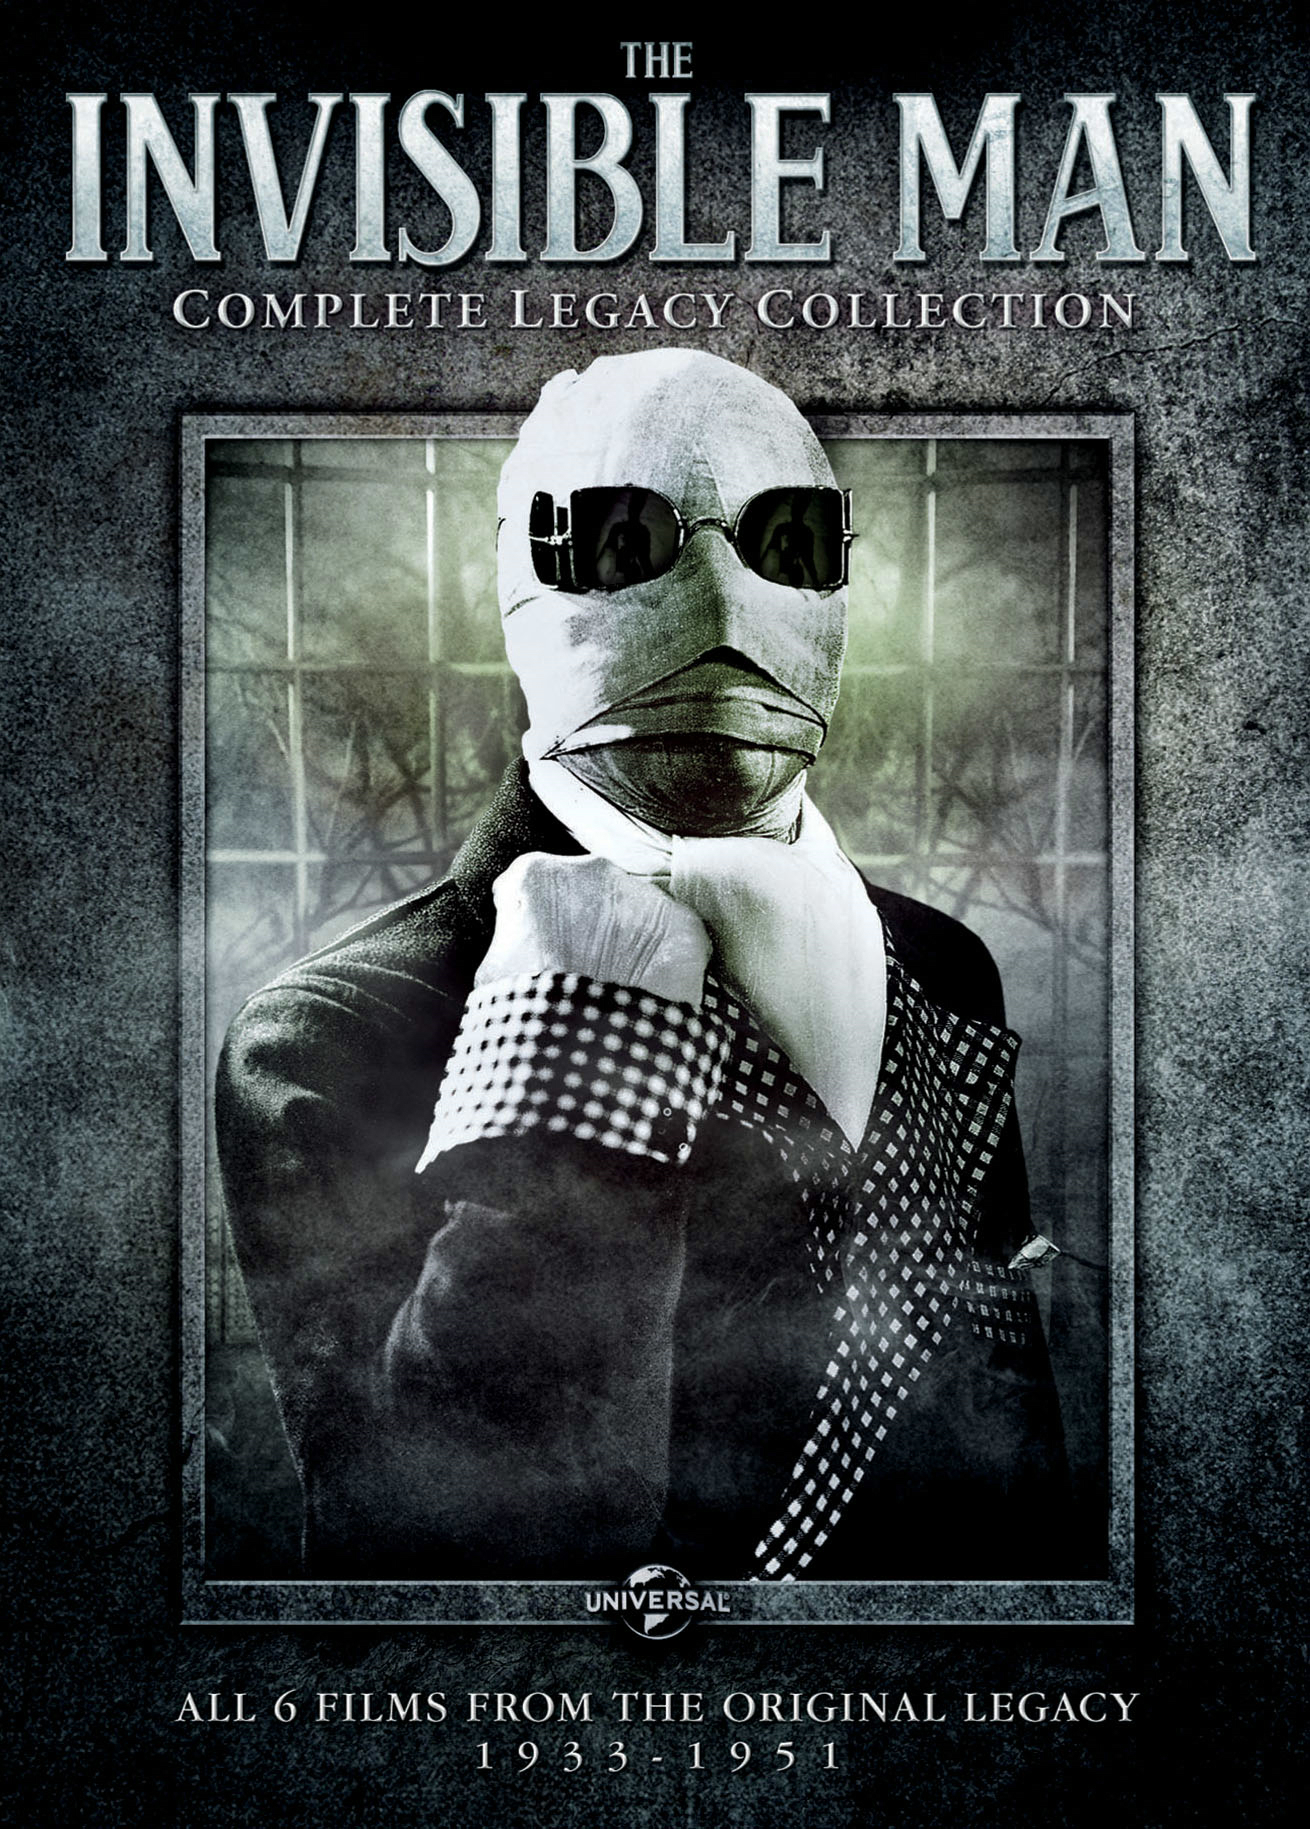 The Invisible Man: Complete Legacy Collection (Box Set) - DVD [ 1951 ]  - Drama Movies On DVD - Movies On GRUV